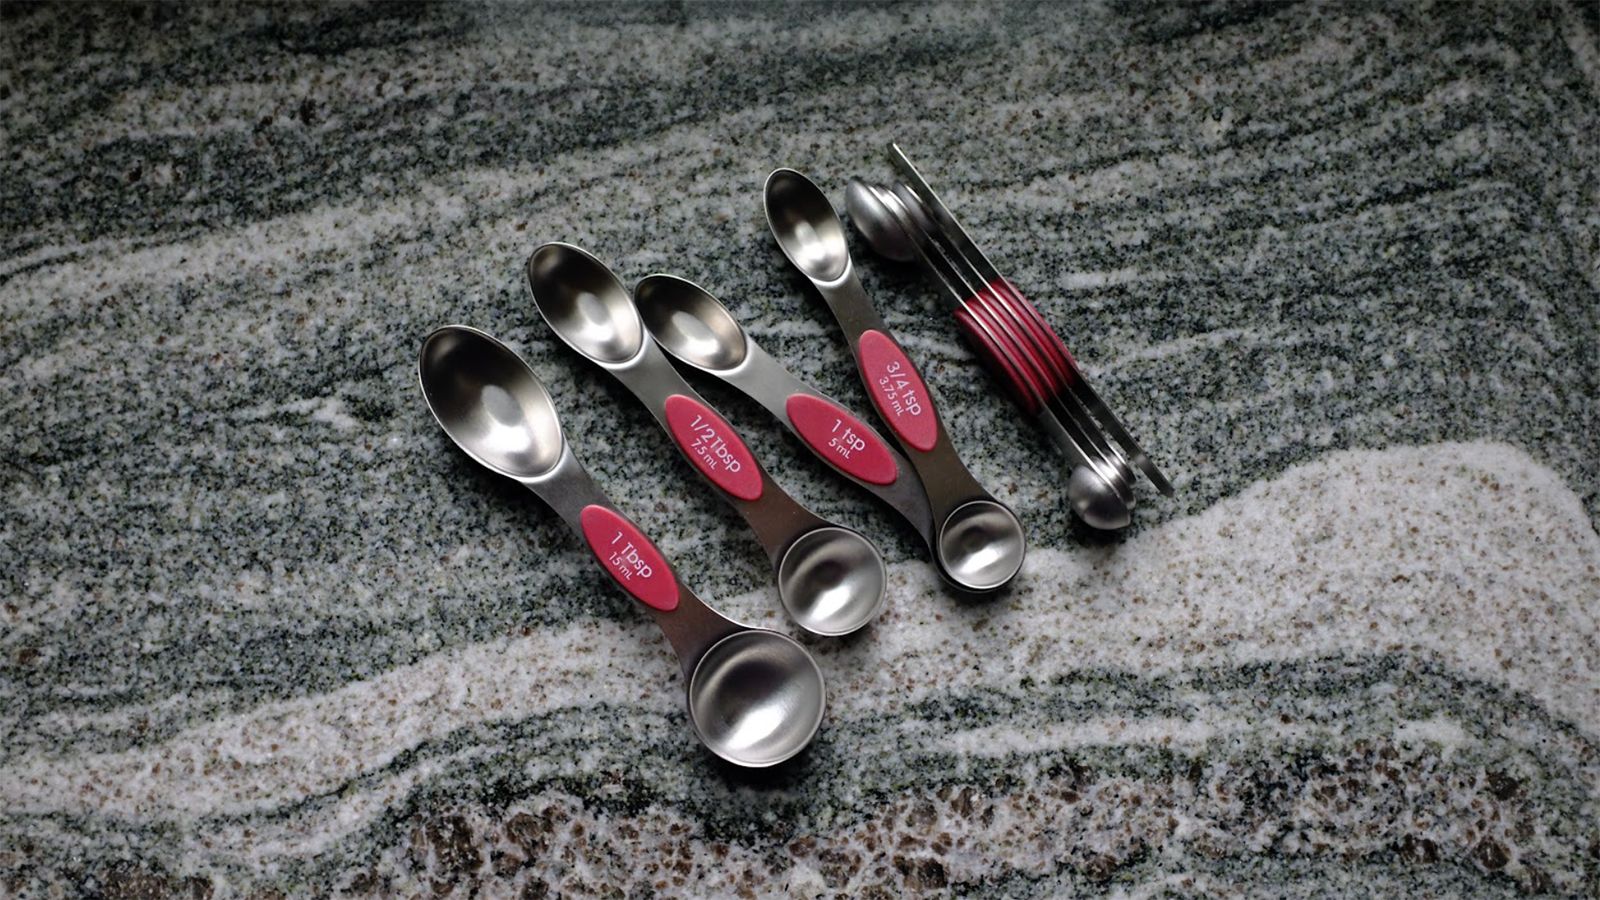 Stainless Steel Measuring Spoons Set, Small Measuring Spoon Metal Teaspoon  Measure Spoon for Dry or Liquid Ingredients (9 Pcs)